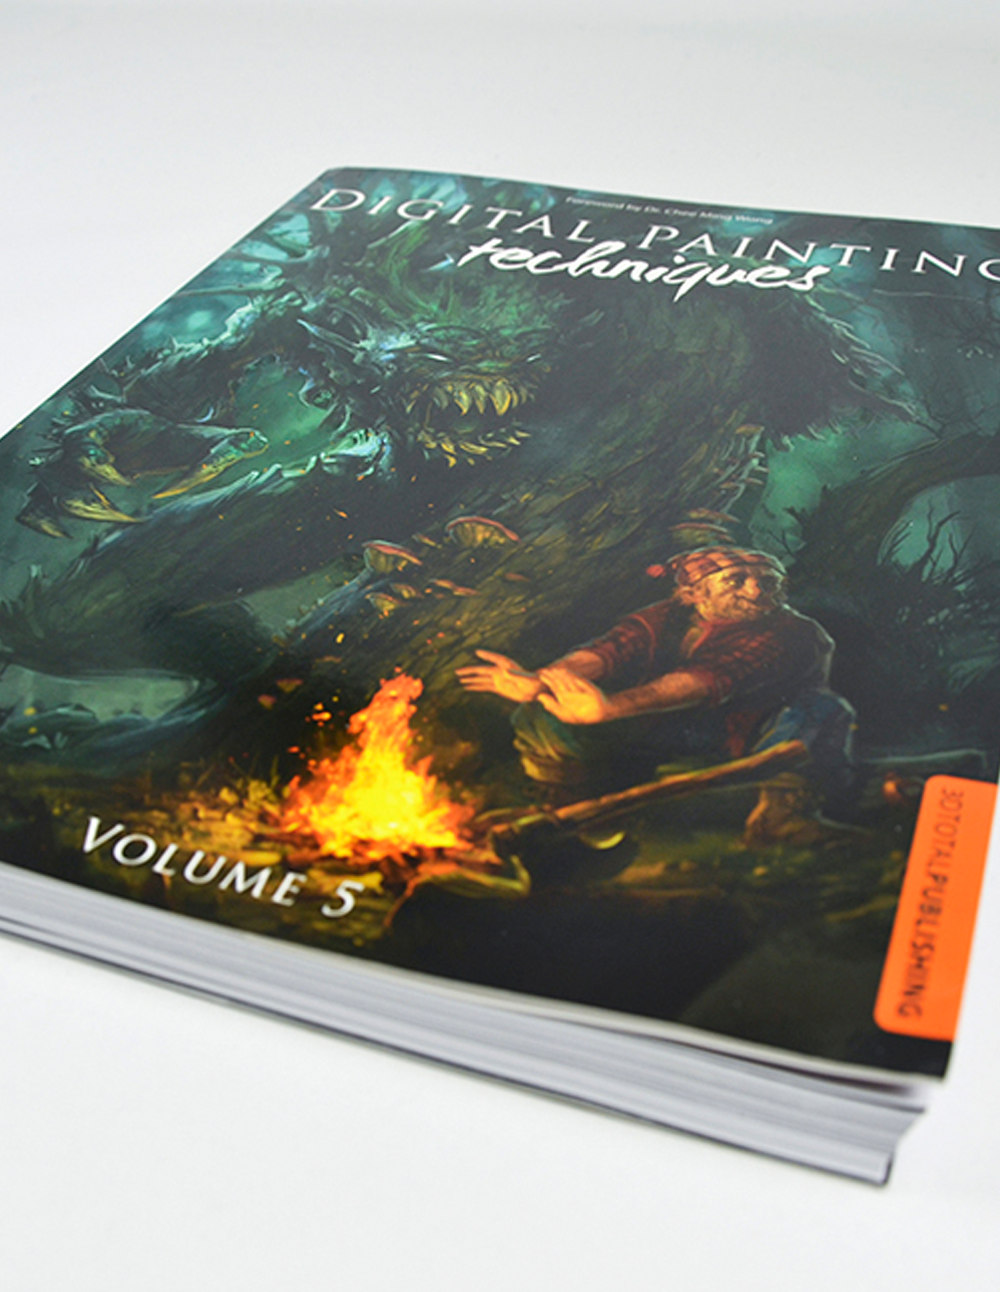 Digital Painting Techniques: Volume 5 - OUT OF PRINT!